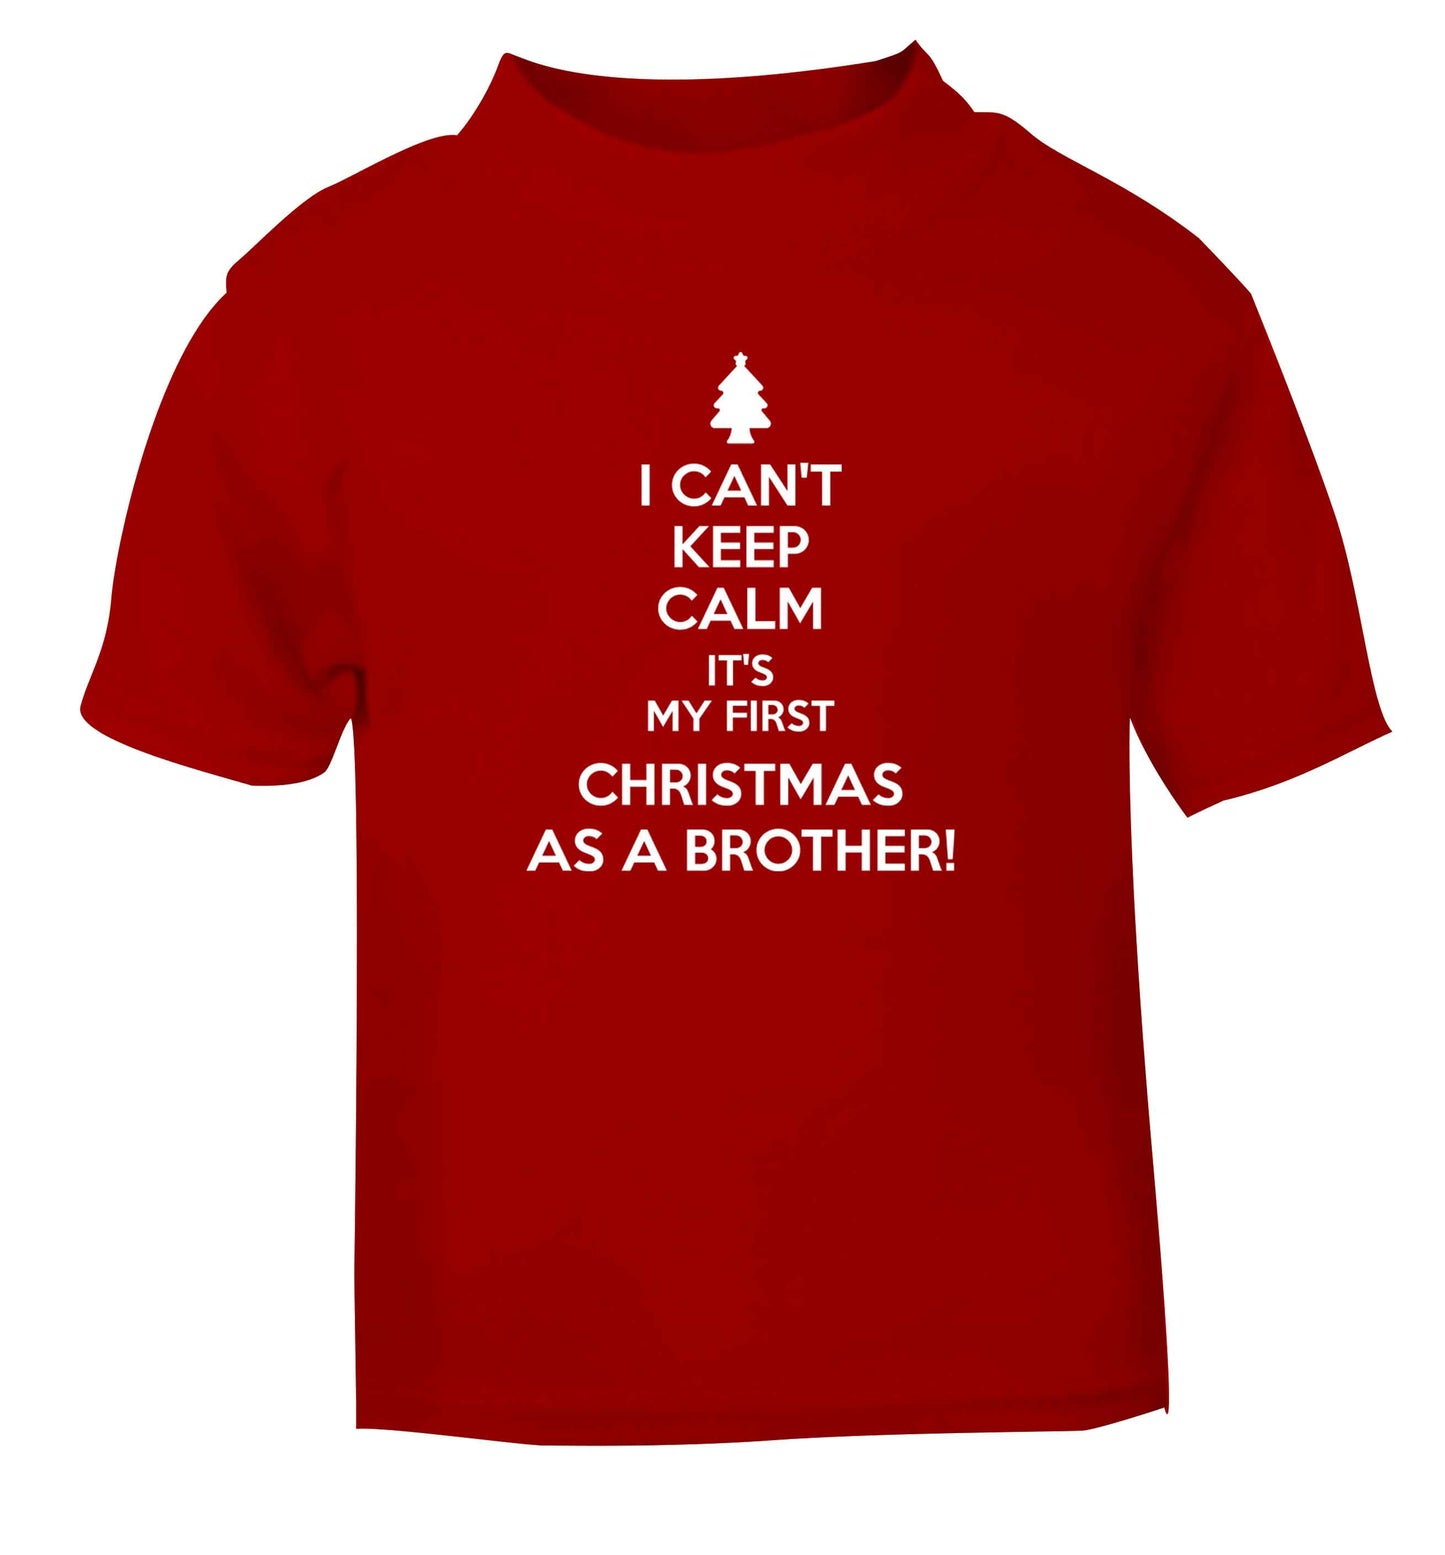 I can't keep calm it's my first Christmas as a brother! red Baby Toddler Tshirt 2 Years